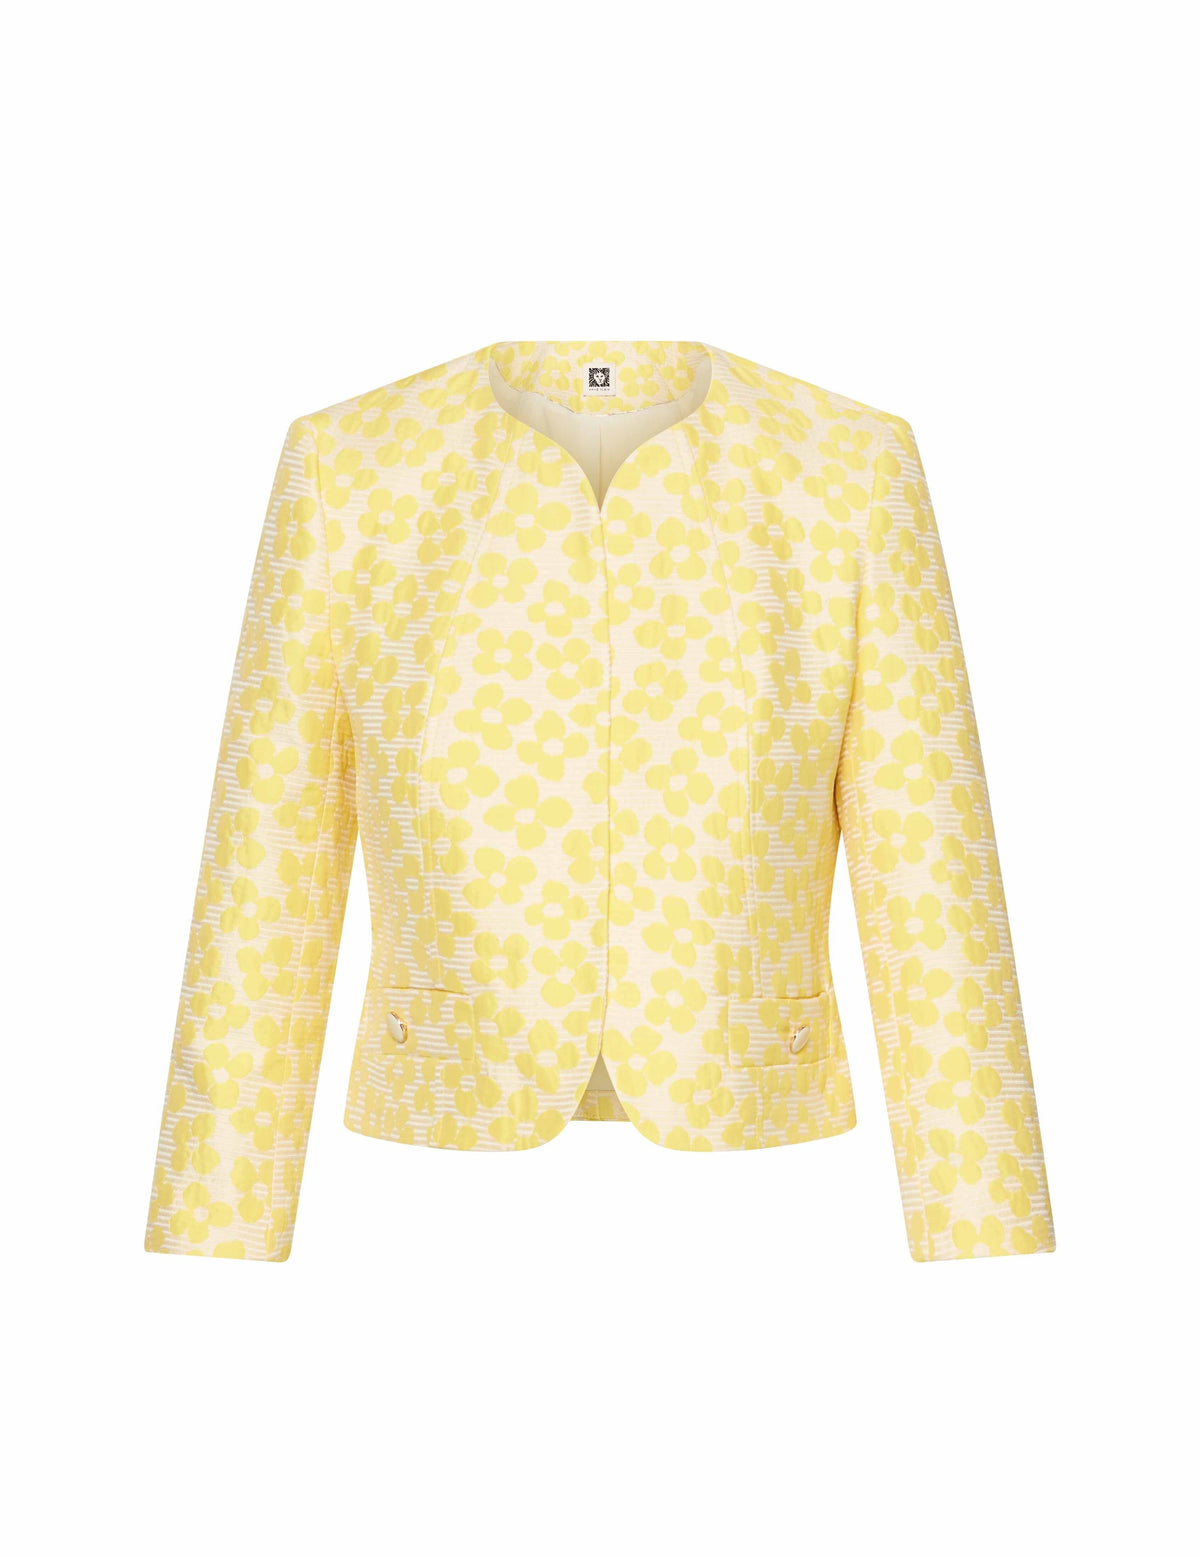 Anne Klein Bright Daffodil Combo Button Jacket with Pocket Flaps- Clearance